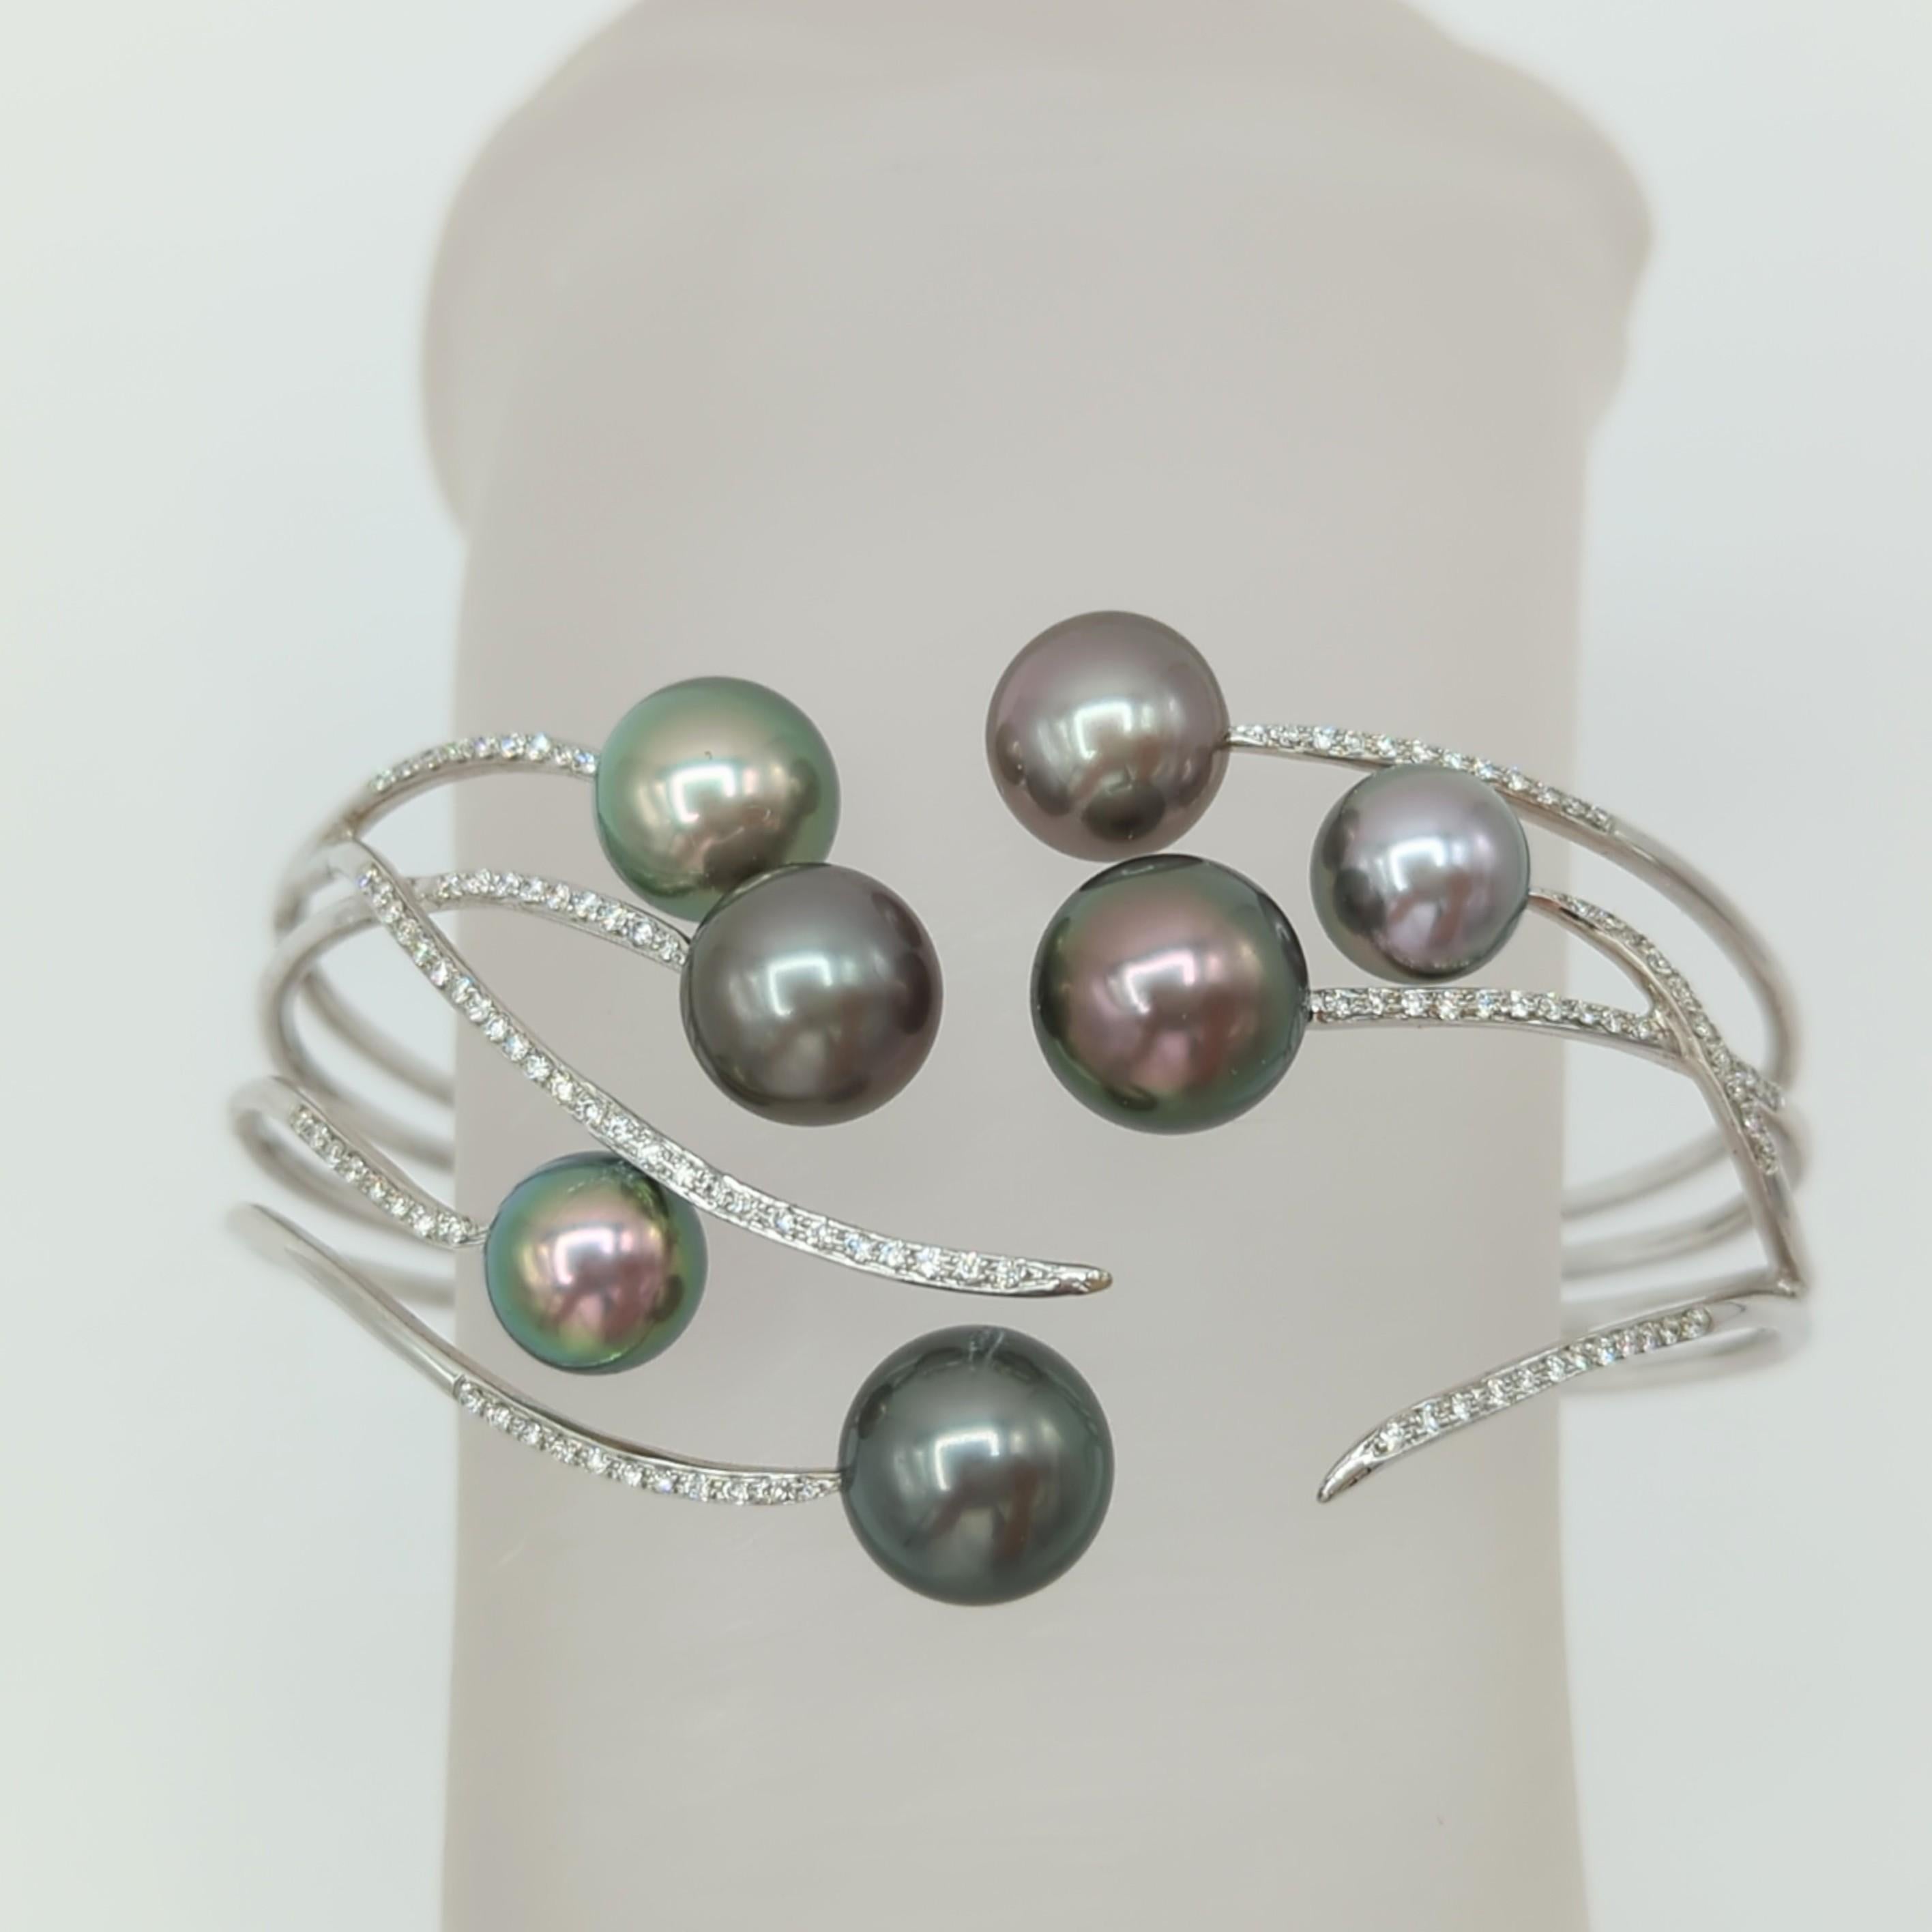 Beautiful Tahitian pearls with 0.50 ct. good quality white diamond rounds.  Handmade in 18k white gold.